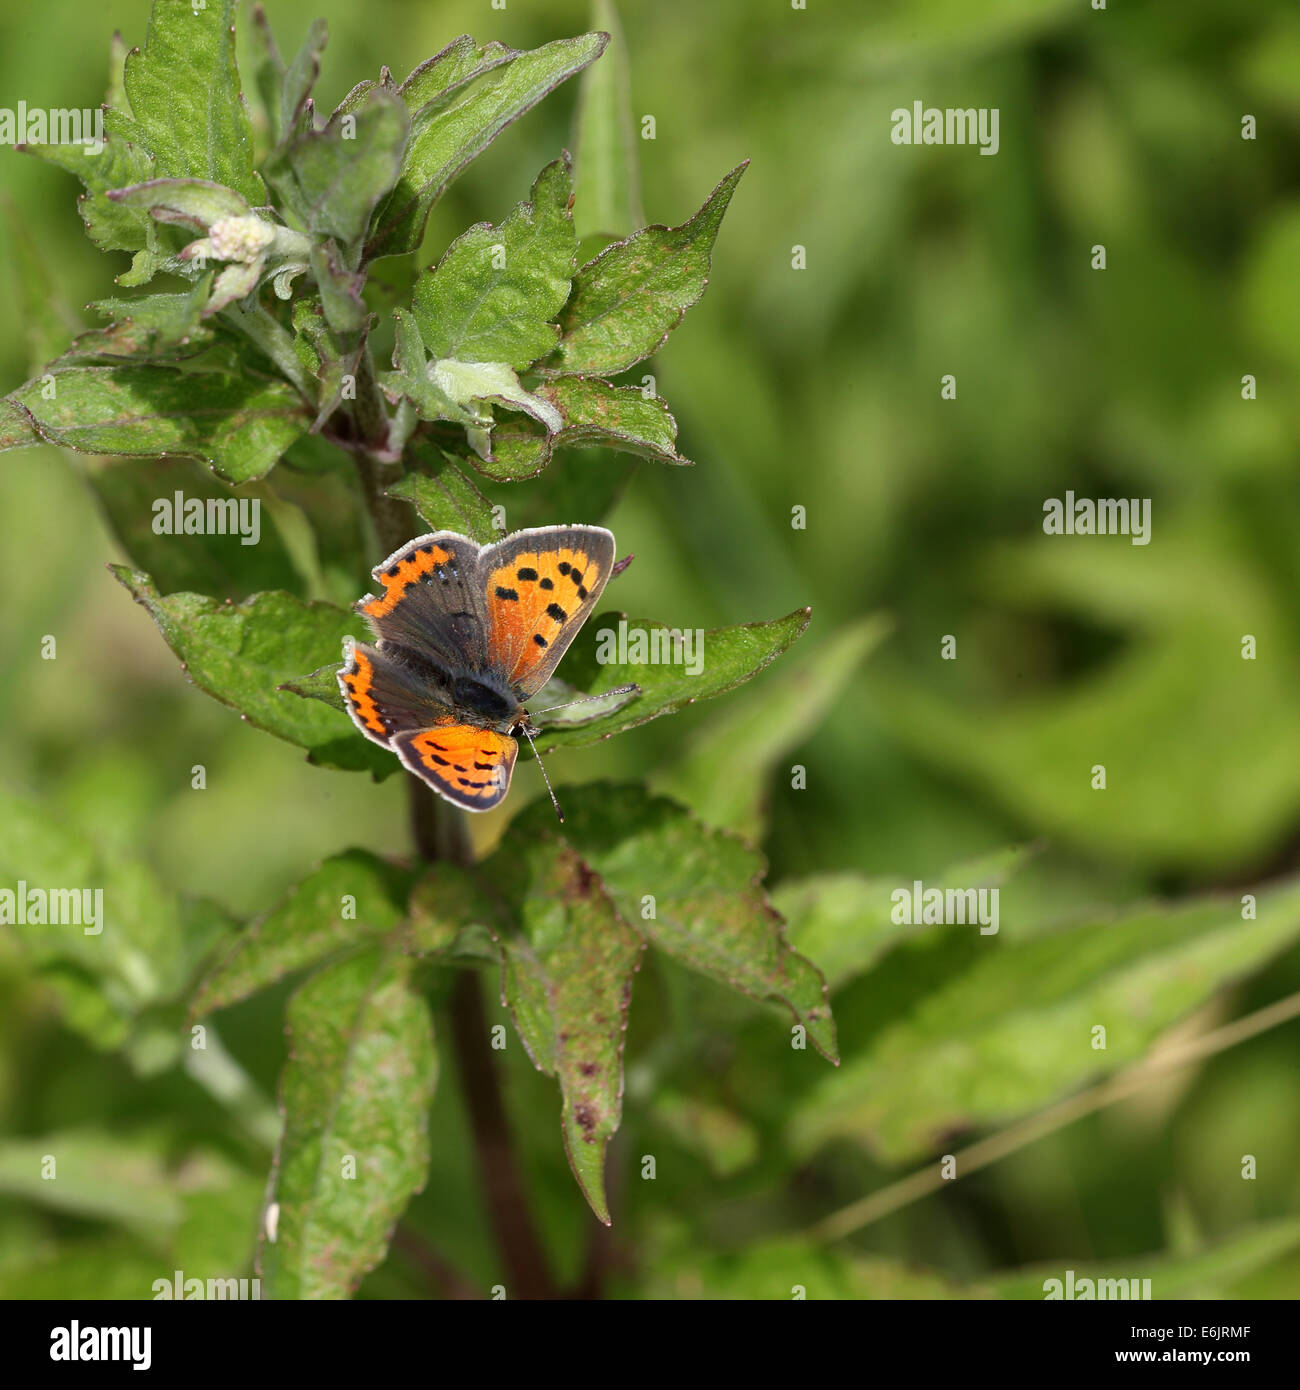 A Small Copper butterfly perched and sunbathing on a leaf of Hemp-agrimony, Norfolk, UK. Stock Photo